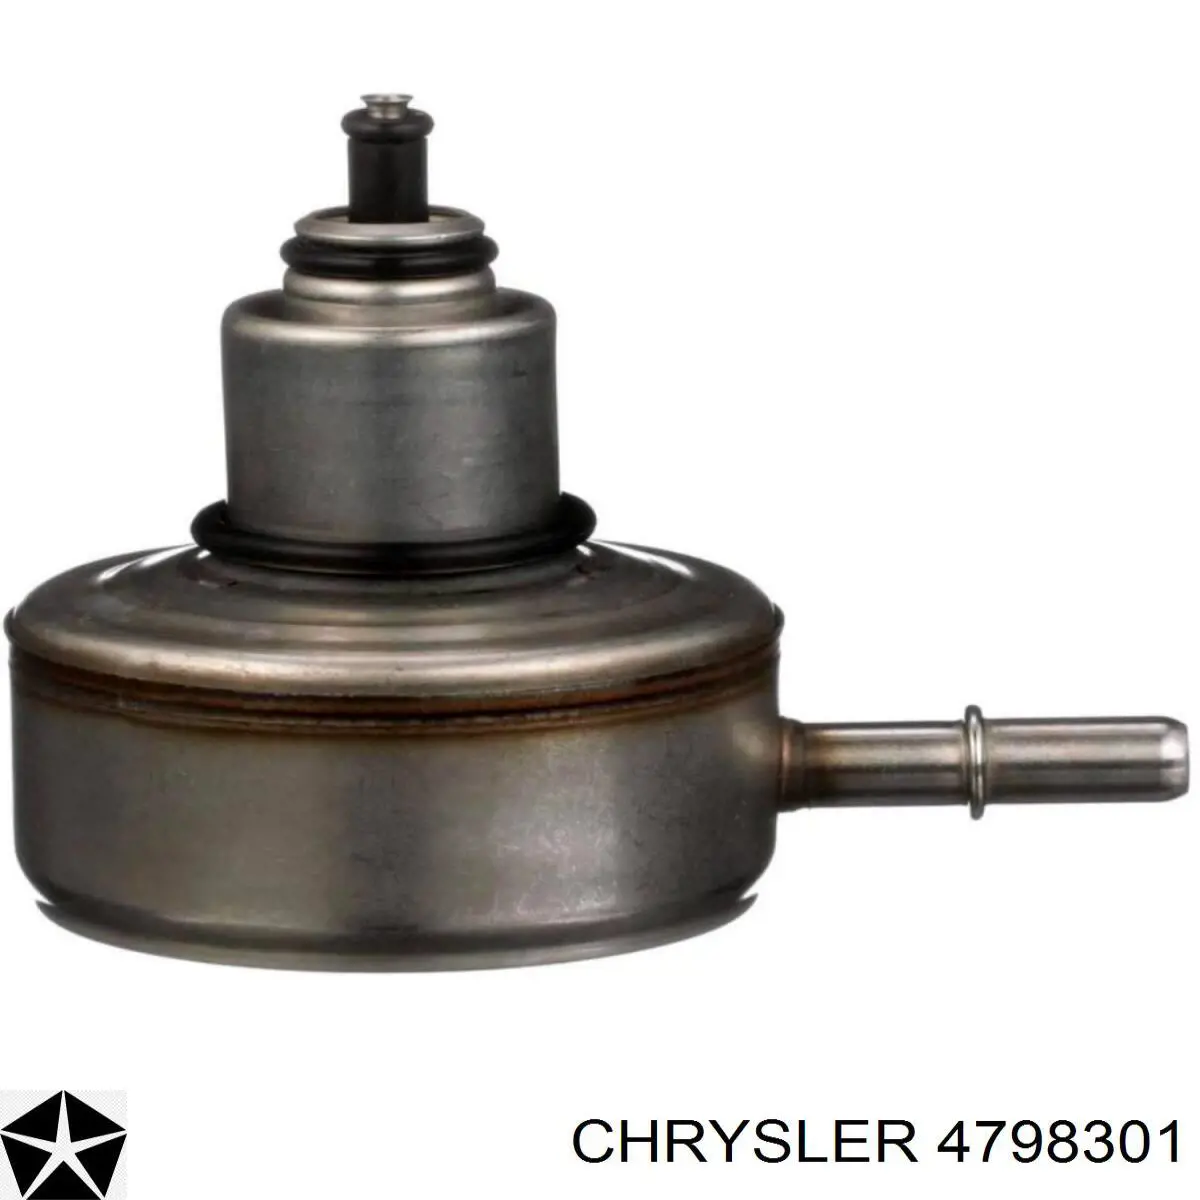 04798301 Chrysler filtro combustible